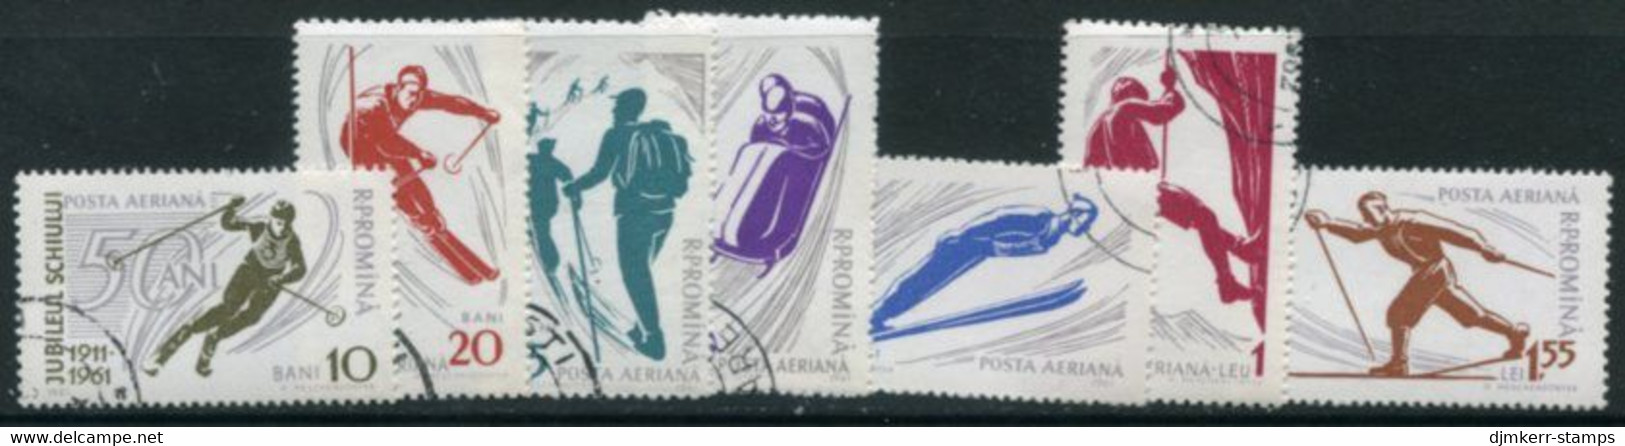 ROMANIA 1961 Winter Sports Perforated Used.  Michel 1951-57 - Used Stamps